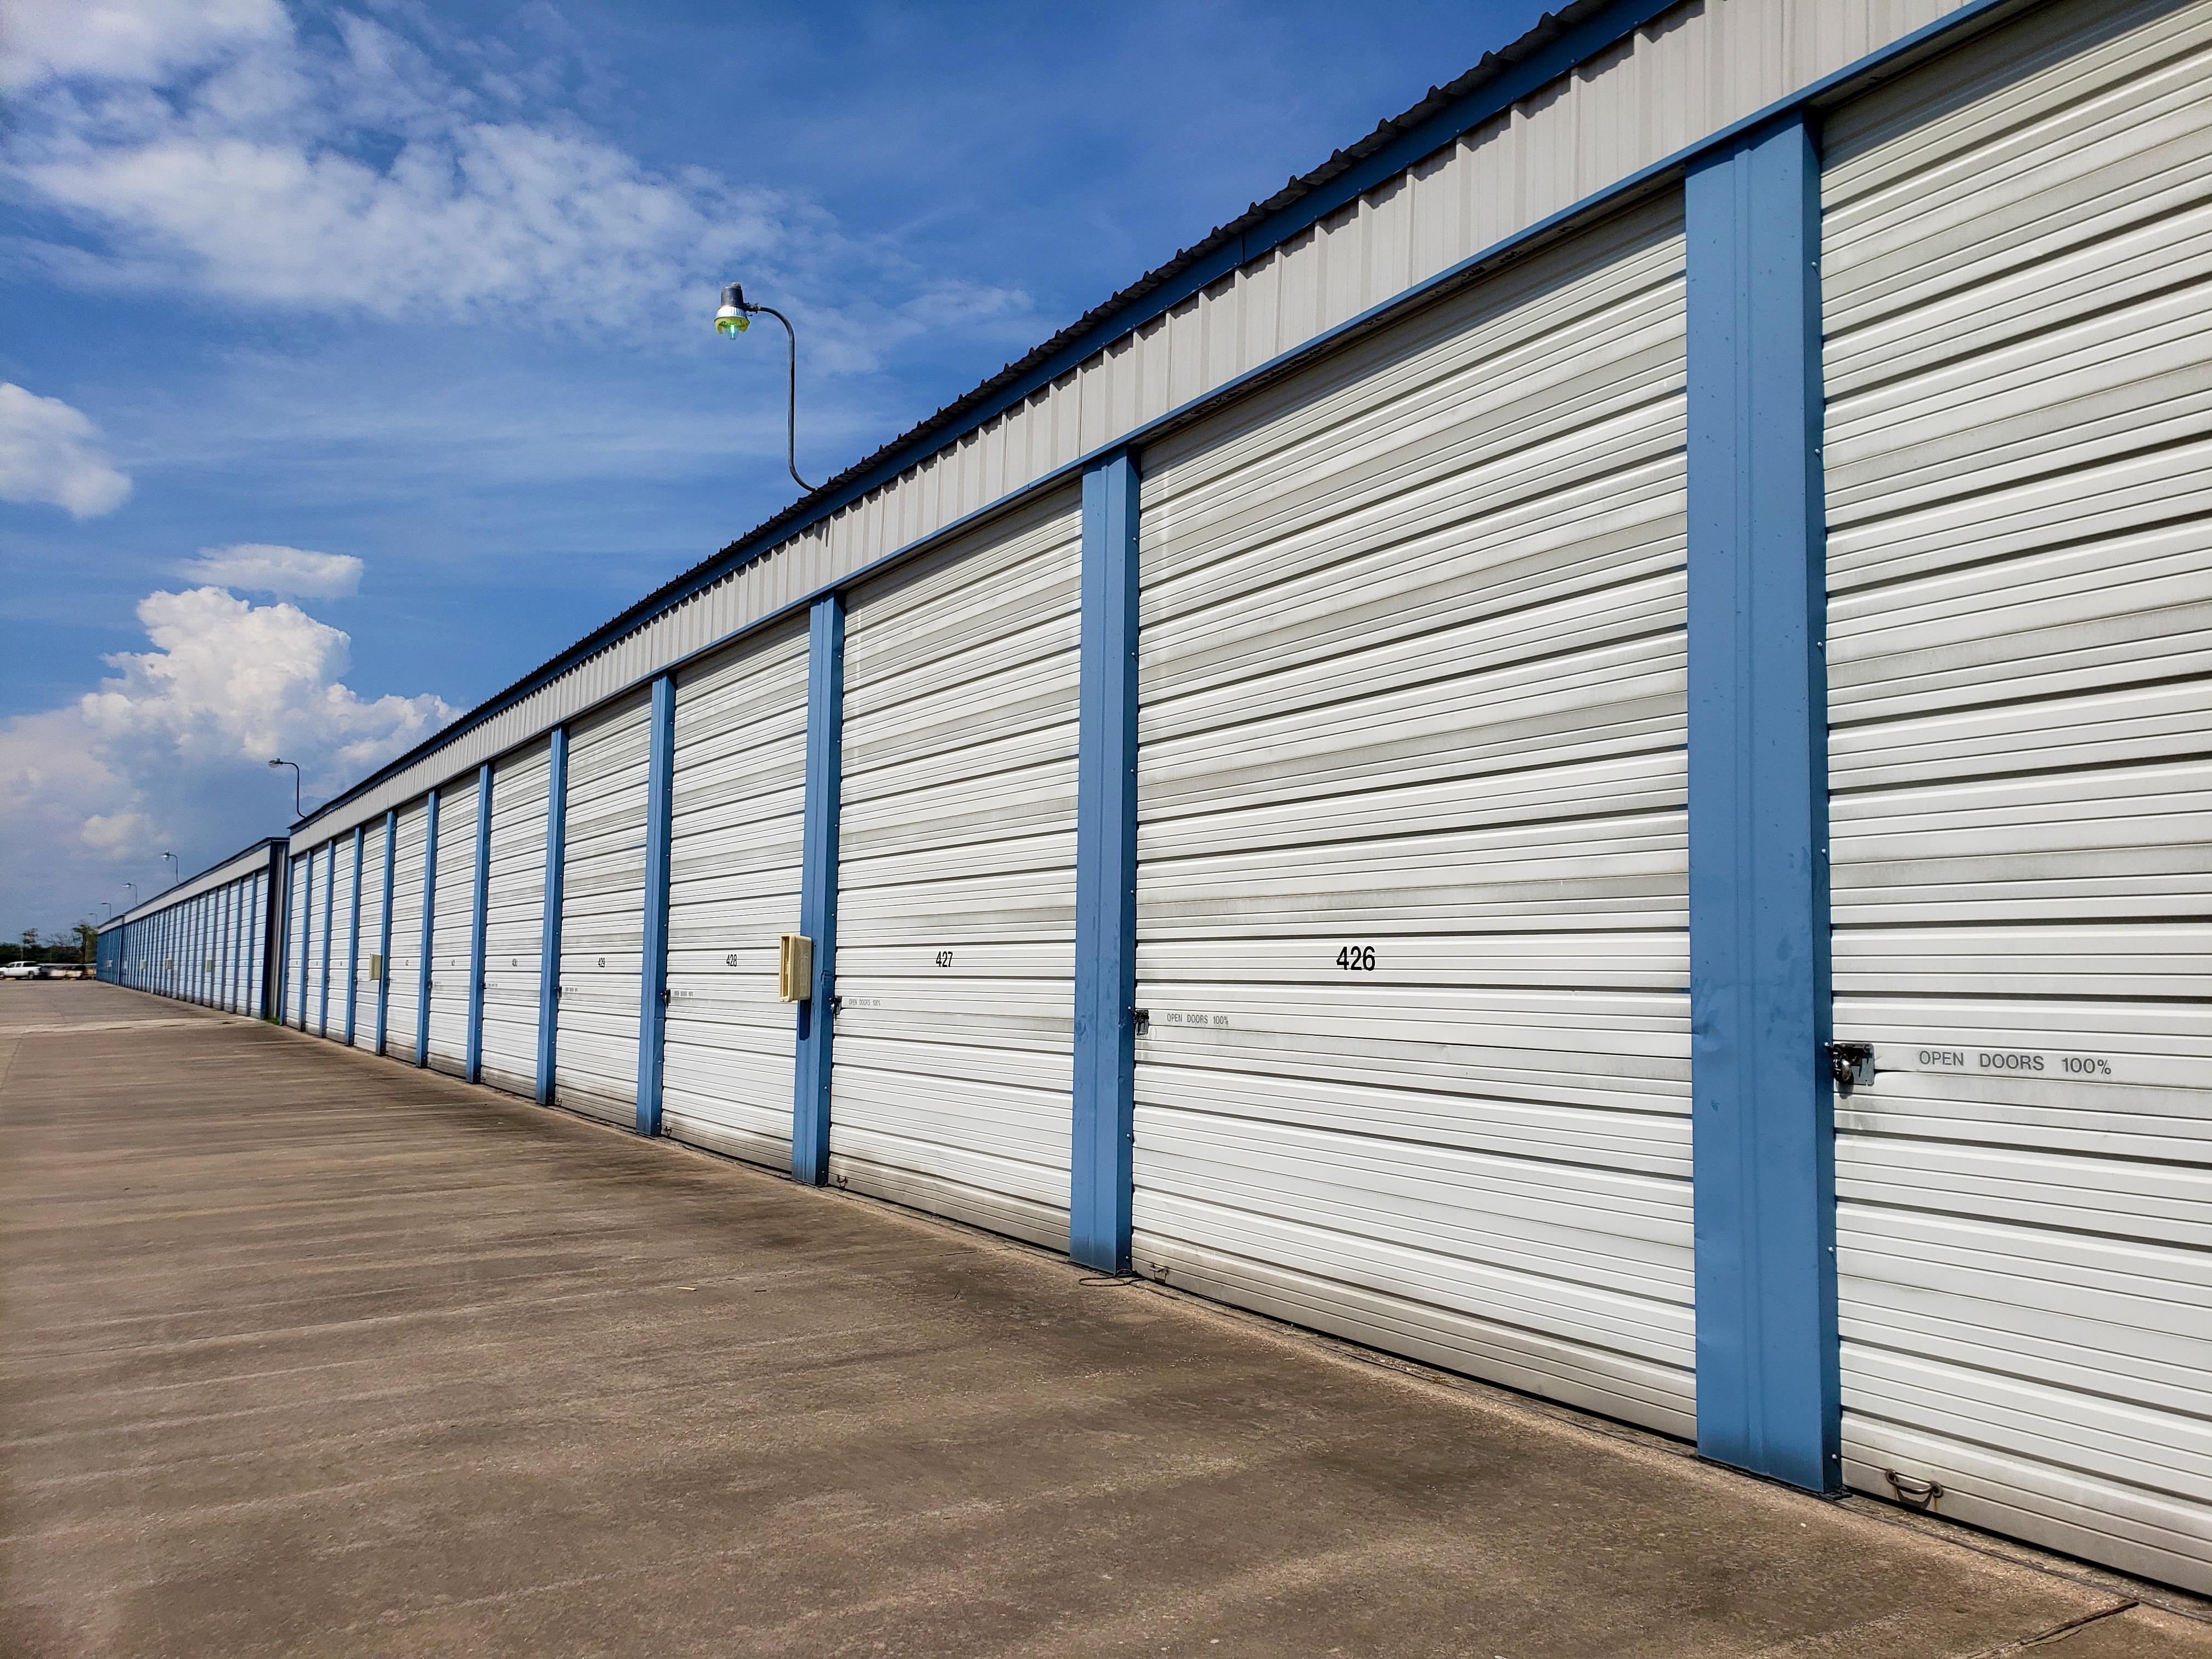 League City Boat & RV Storage's extra tall units make storing even large RVs or wakeboarding boats a breeze!